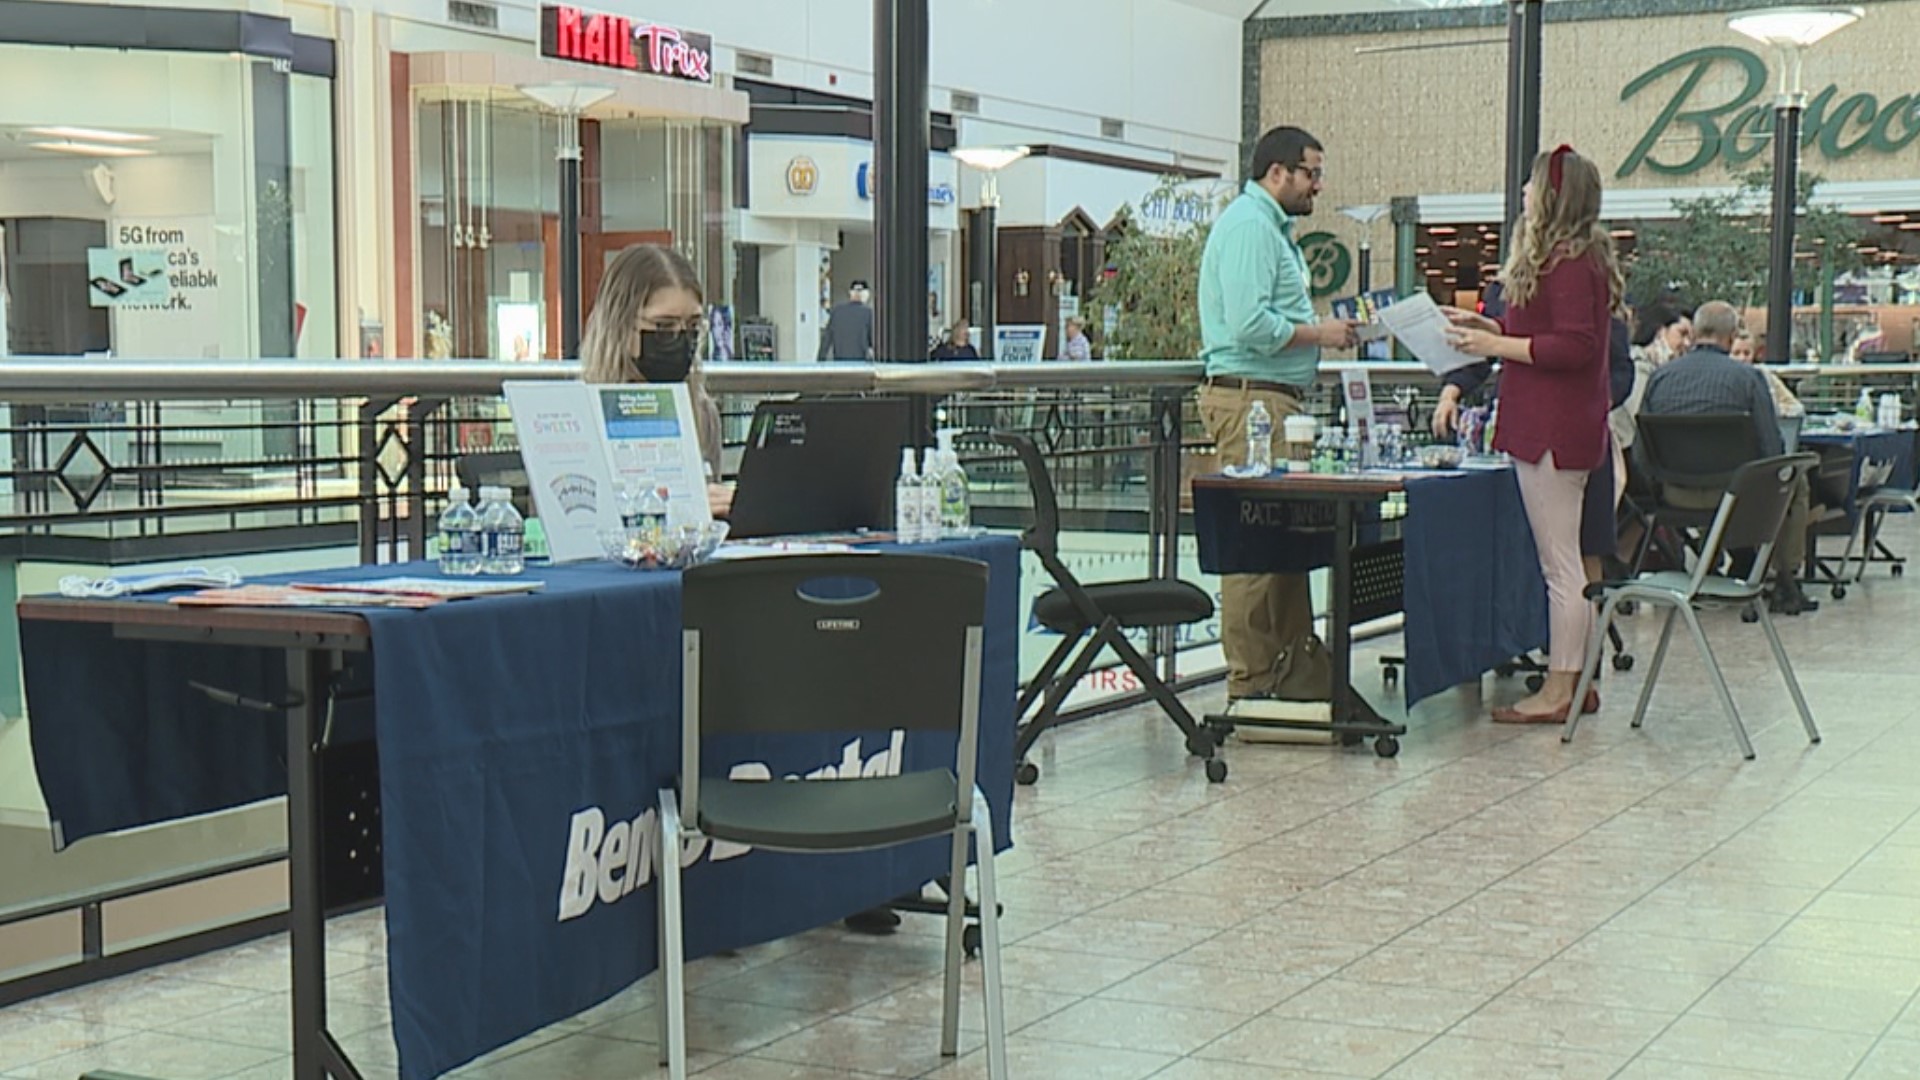 Dress for Success Lackawanna and Benco Dental co-hosted the career event in downtown Scranton on Wednesday.